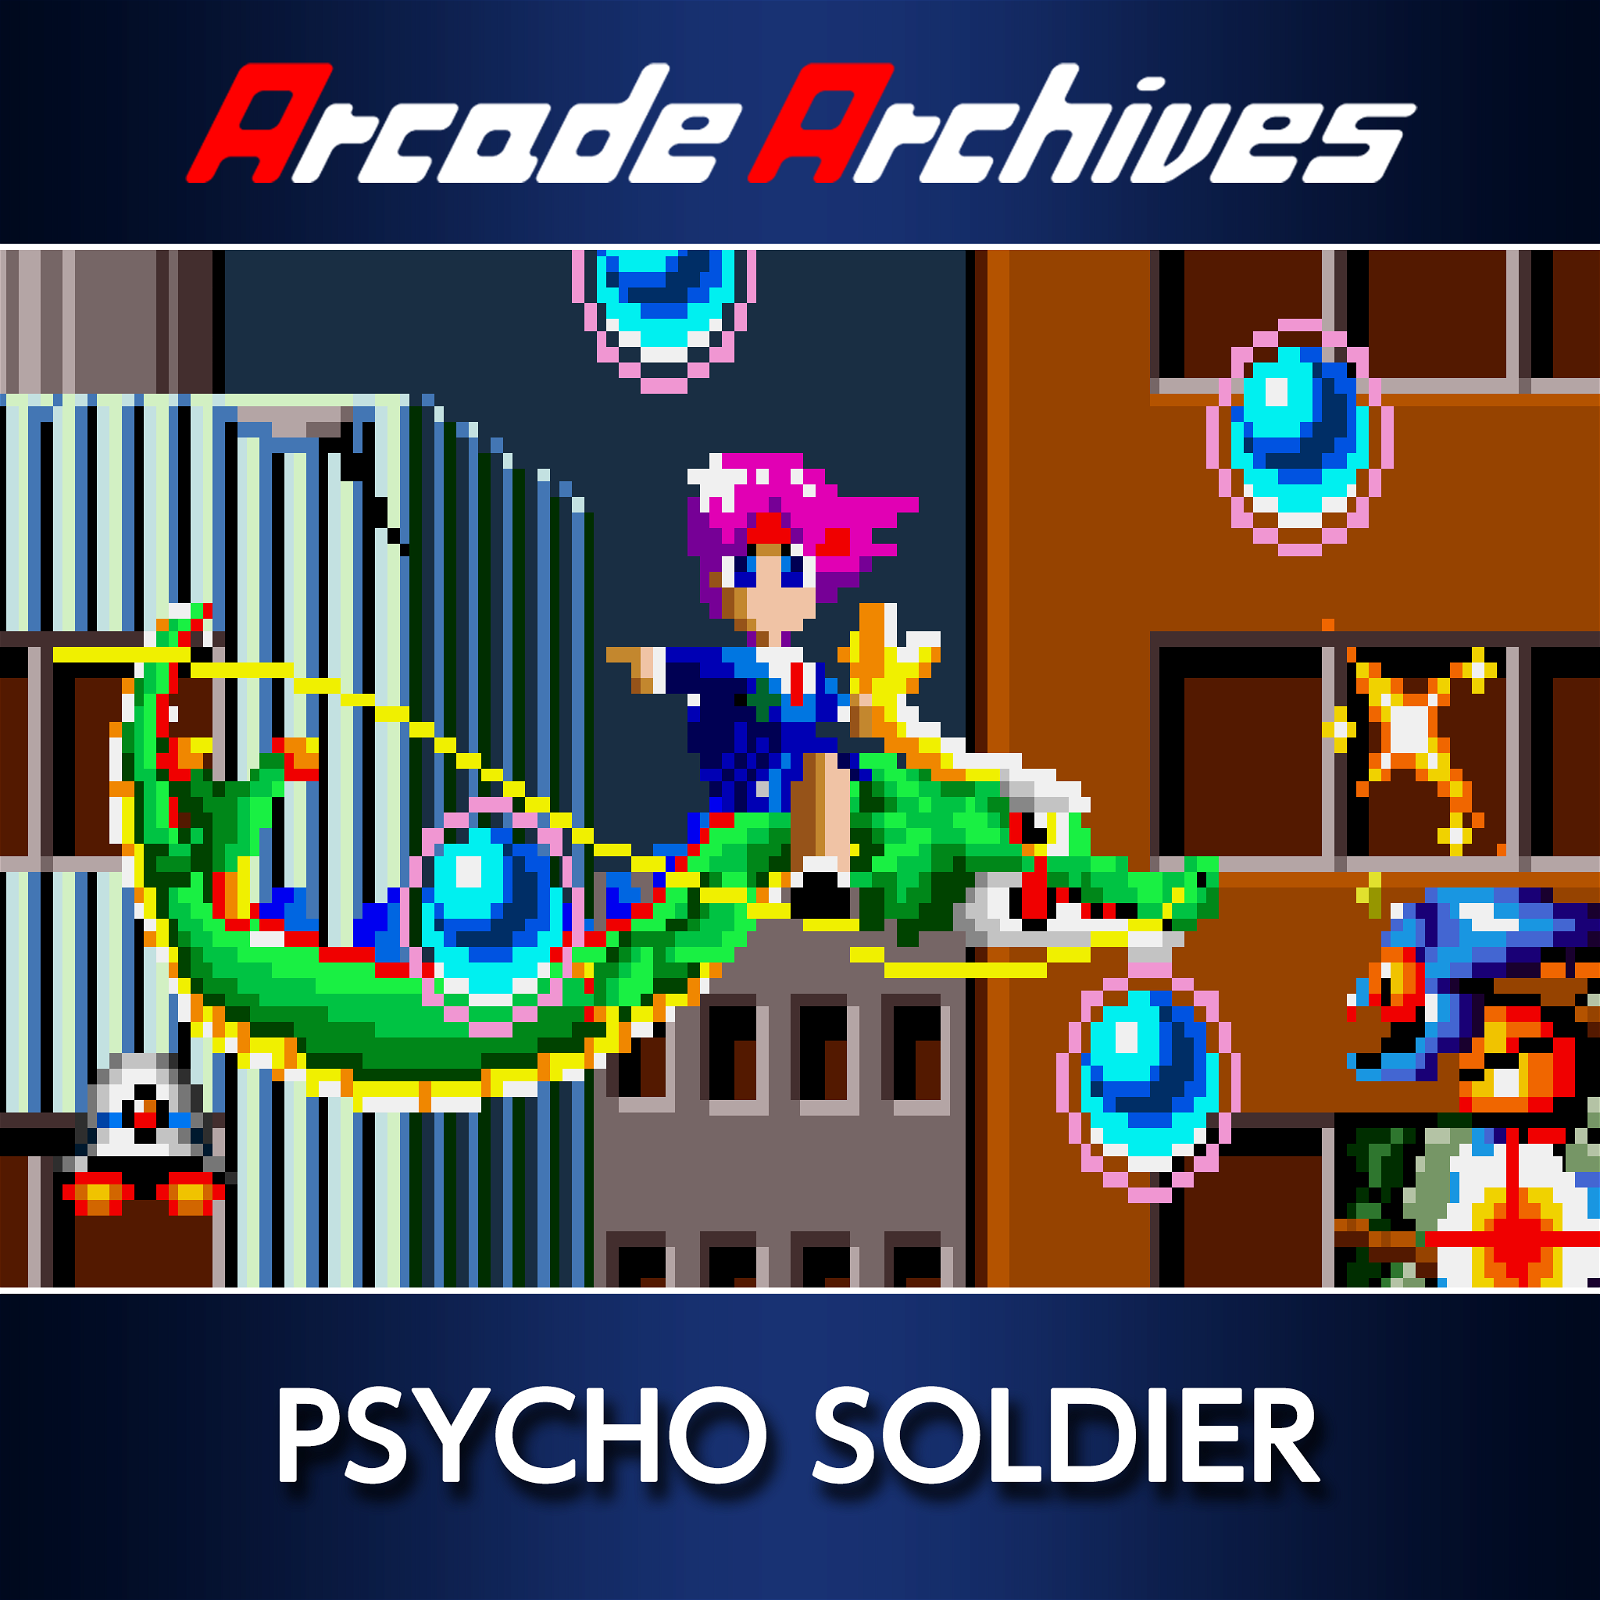 Image of Arcade Archives PSYCHO SOLDIER